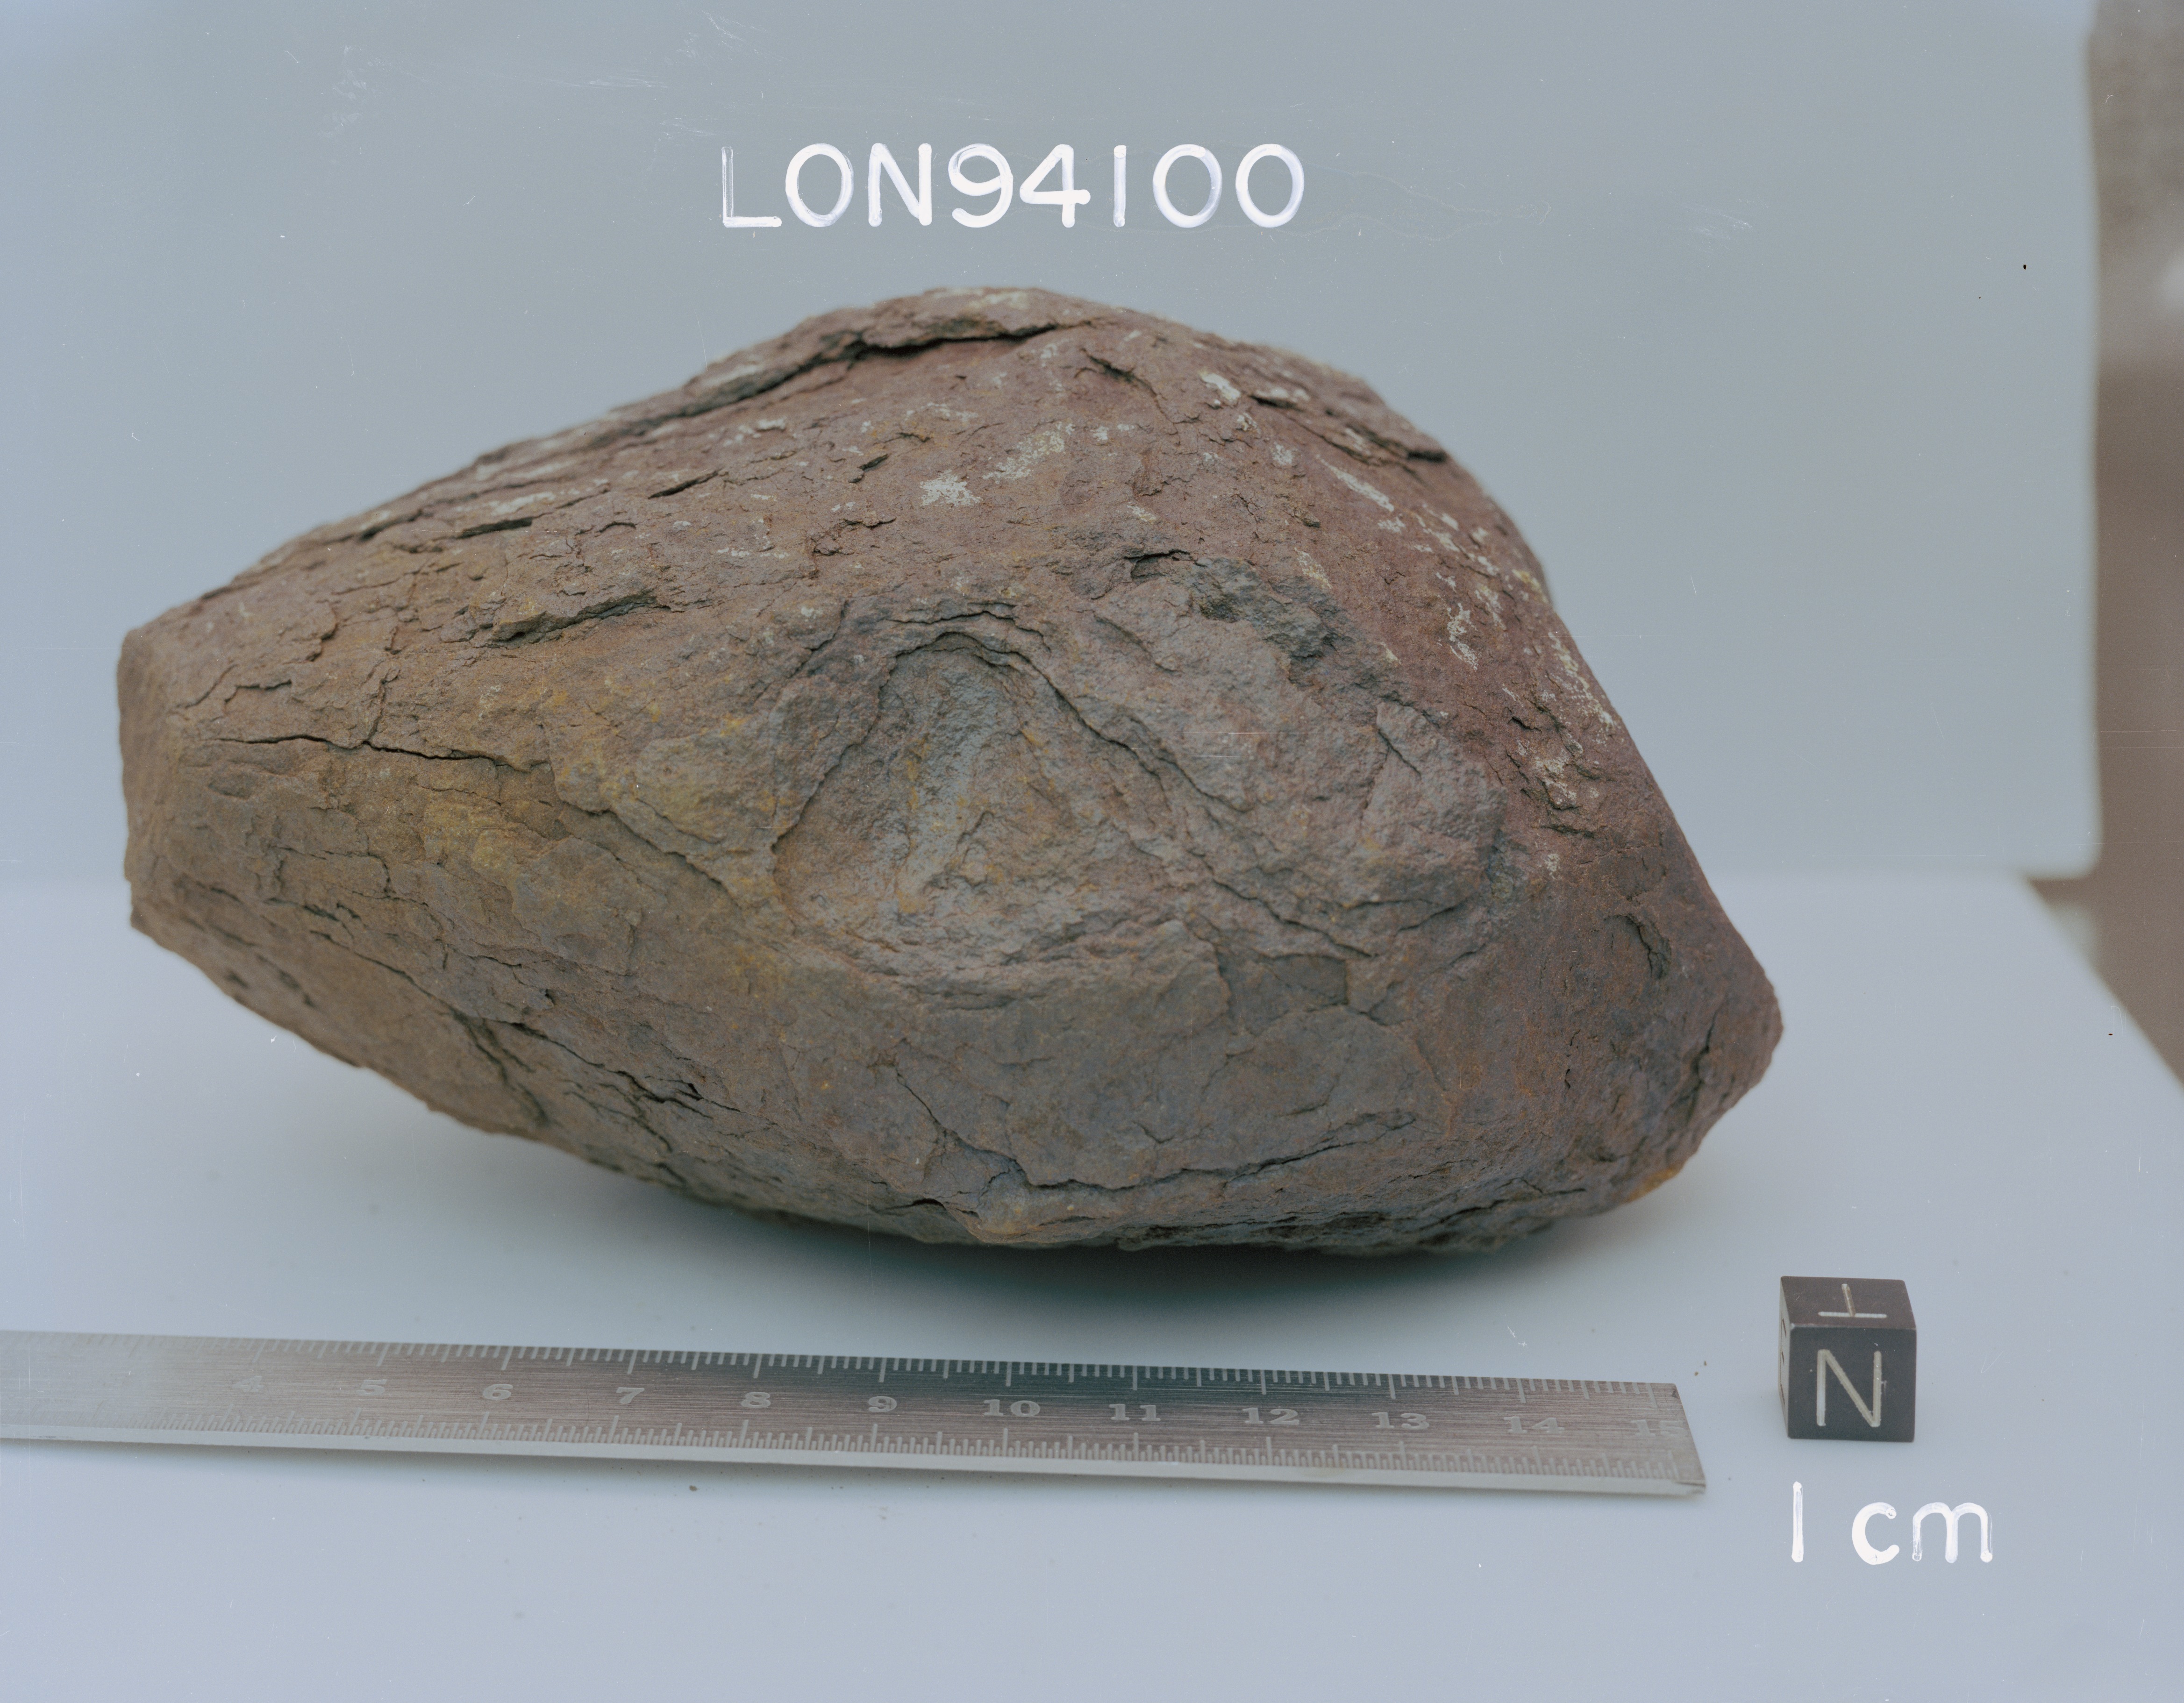 North View of Sample LON 94100 (Photo Number: S96-00429)